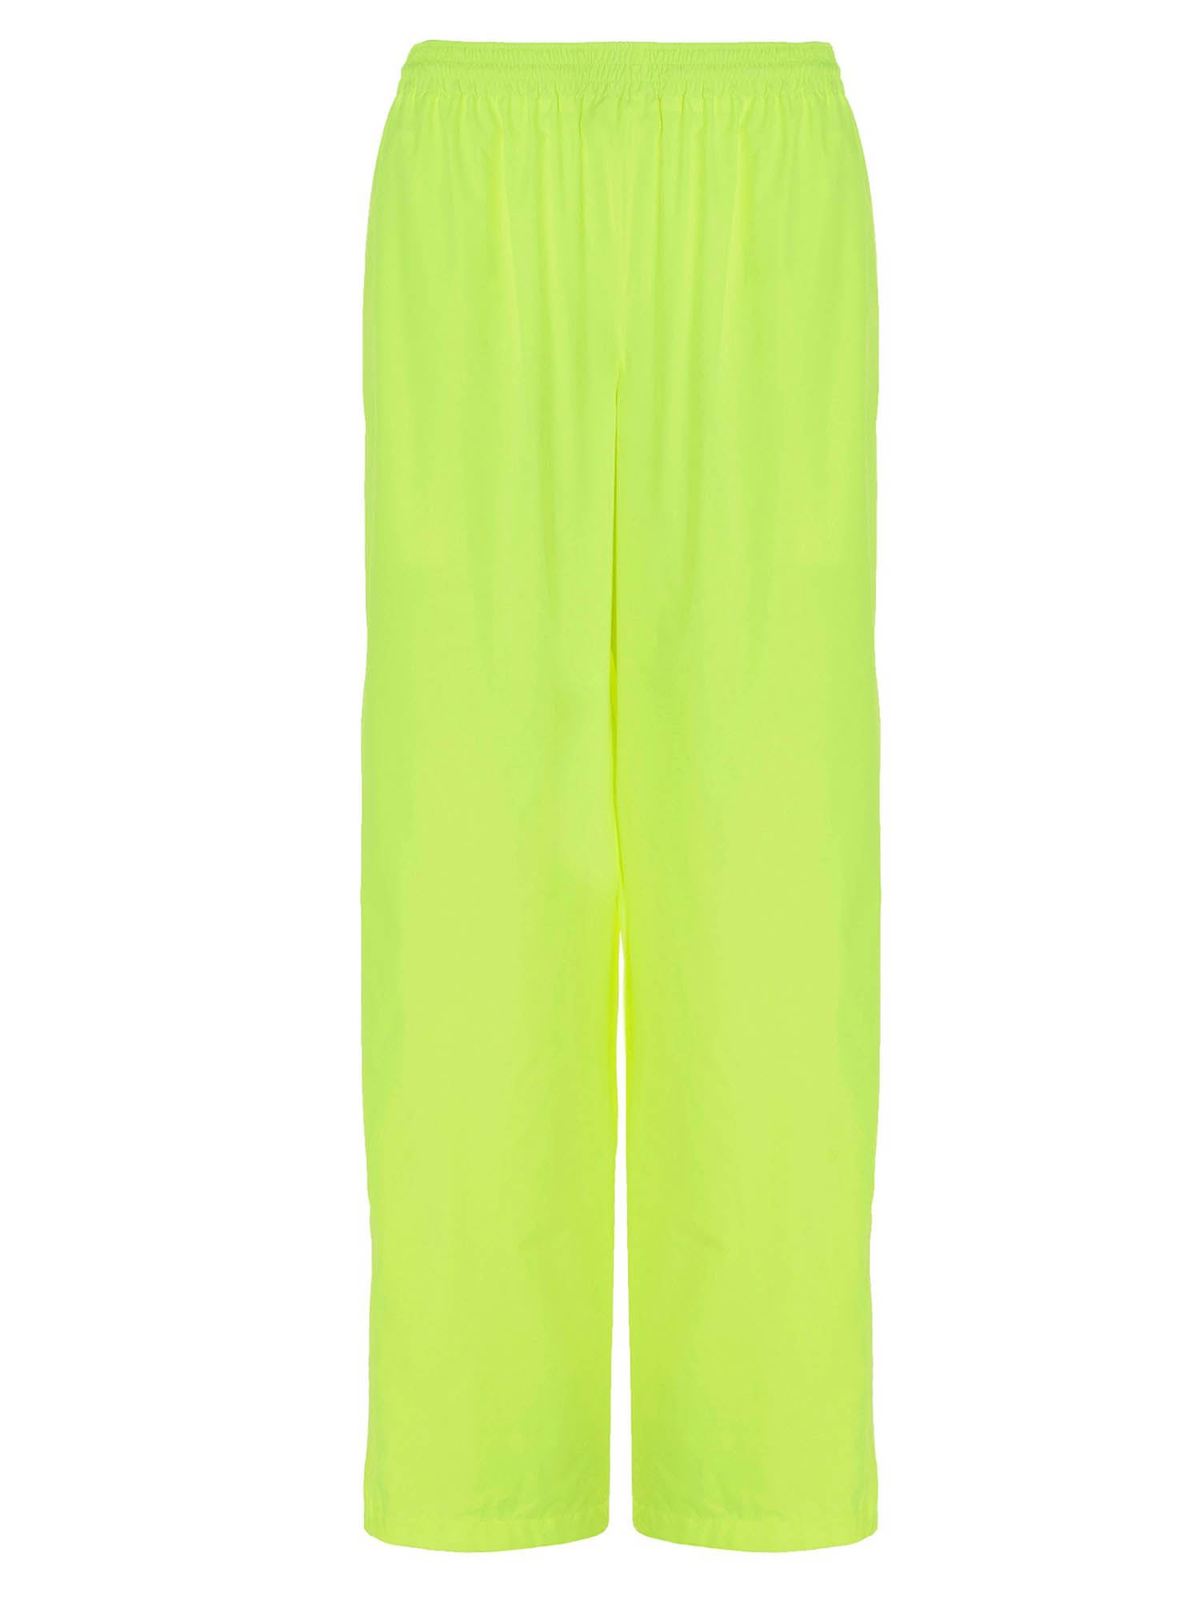 Tracksuit pants in neon yellow